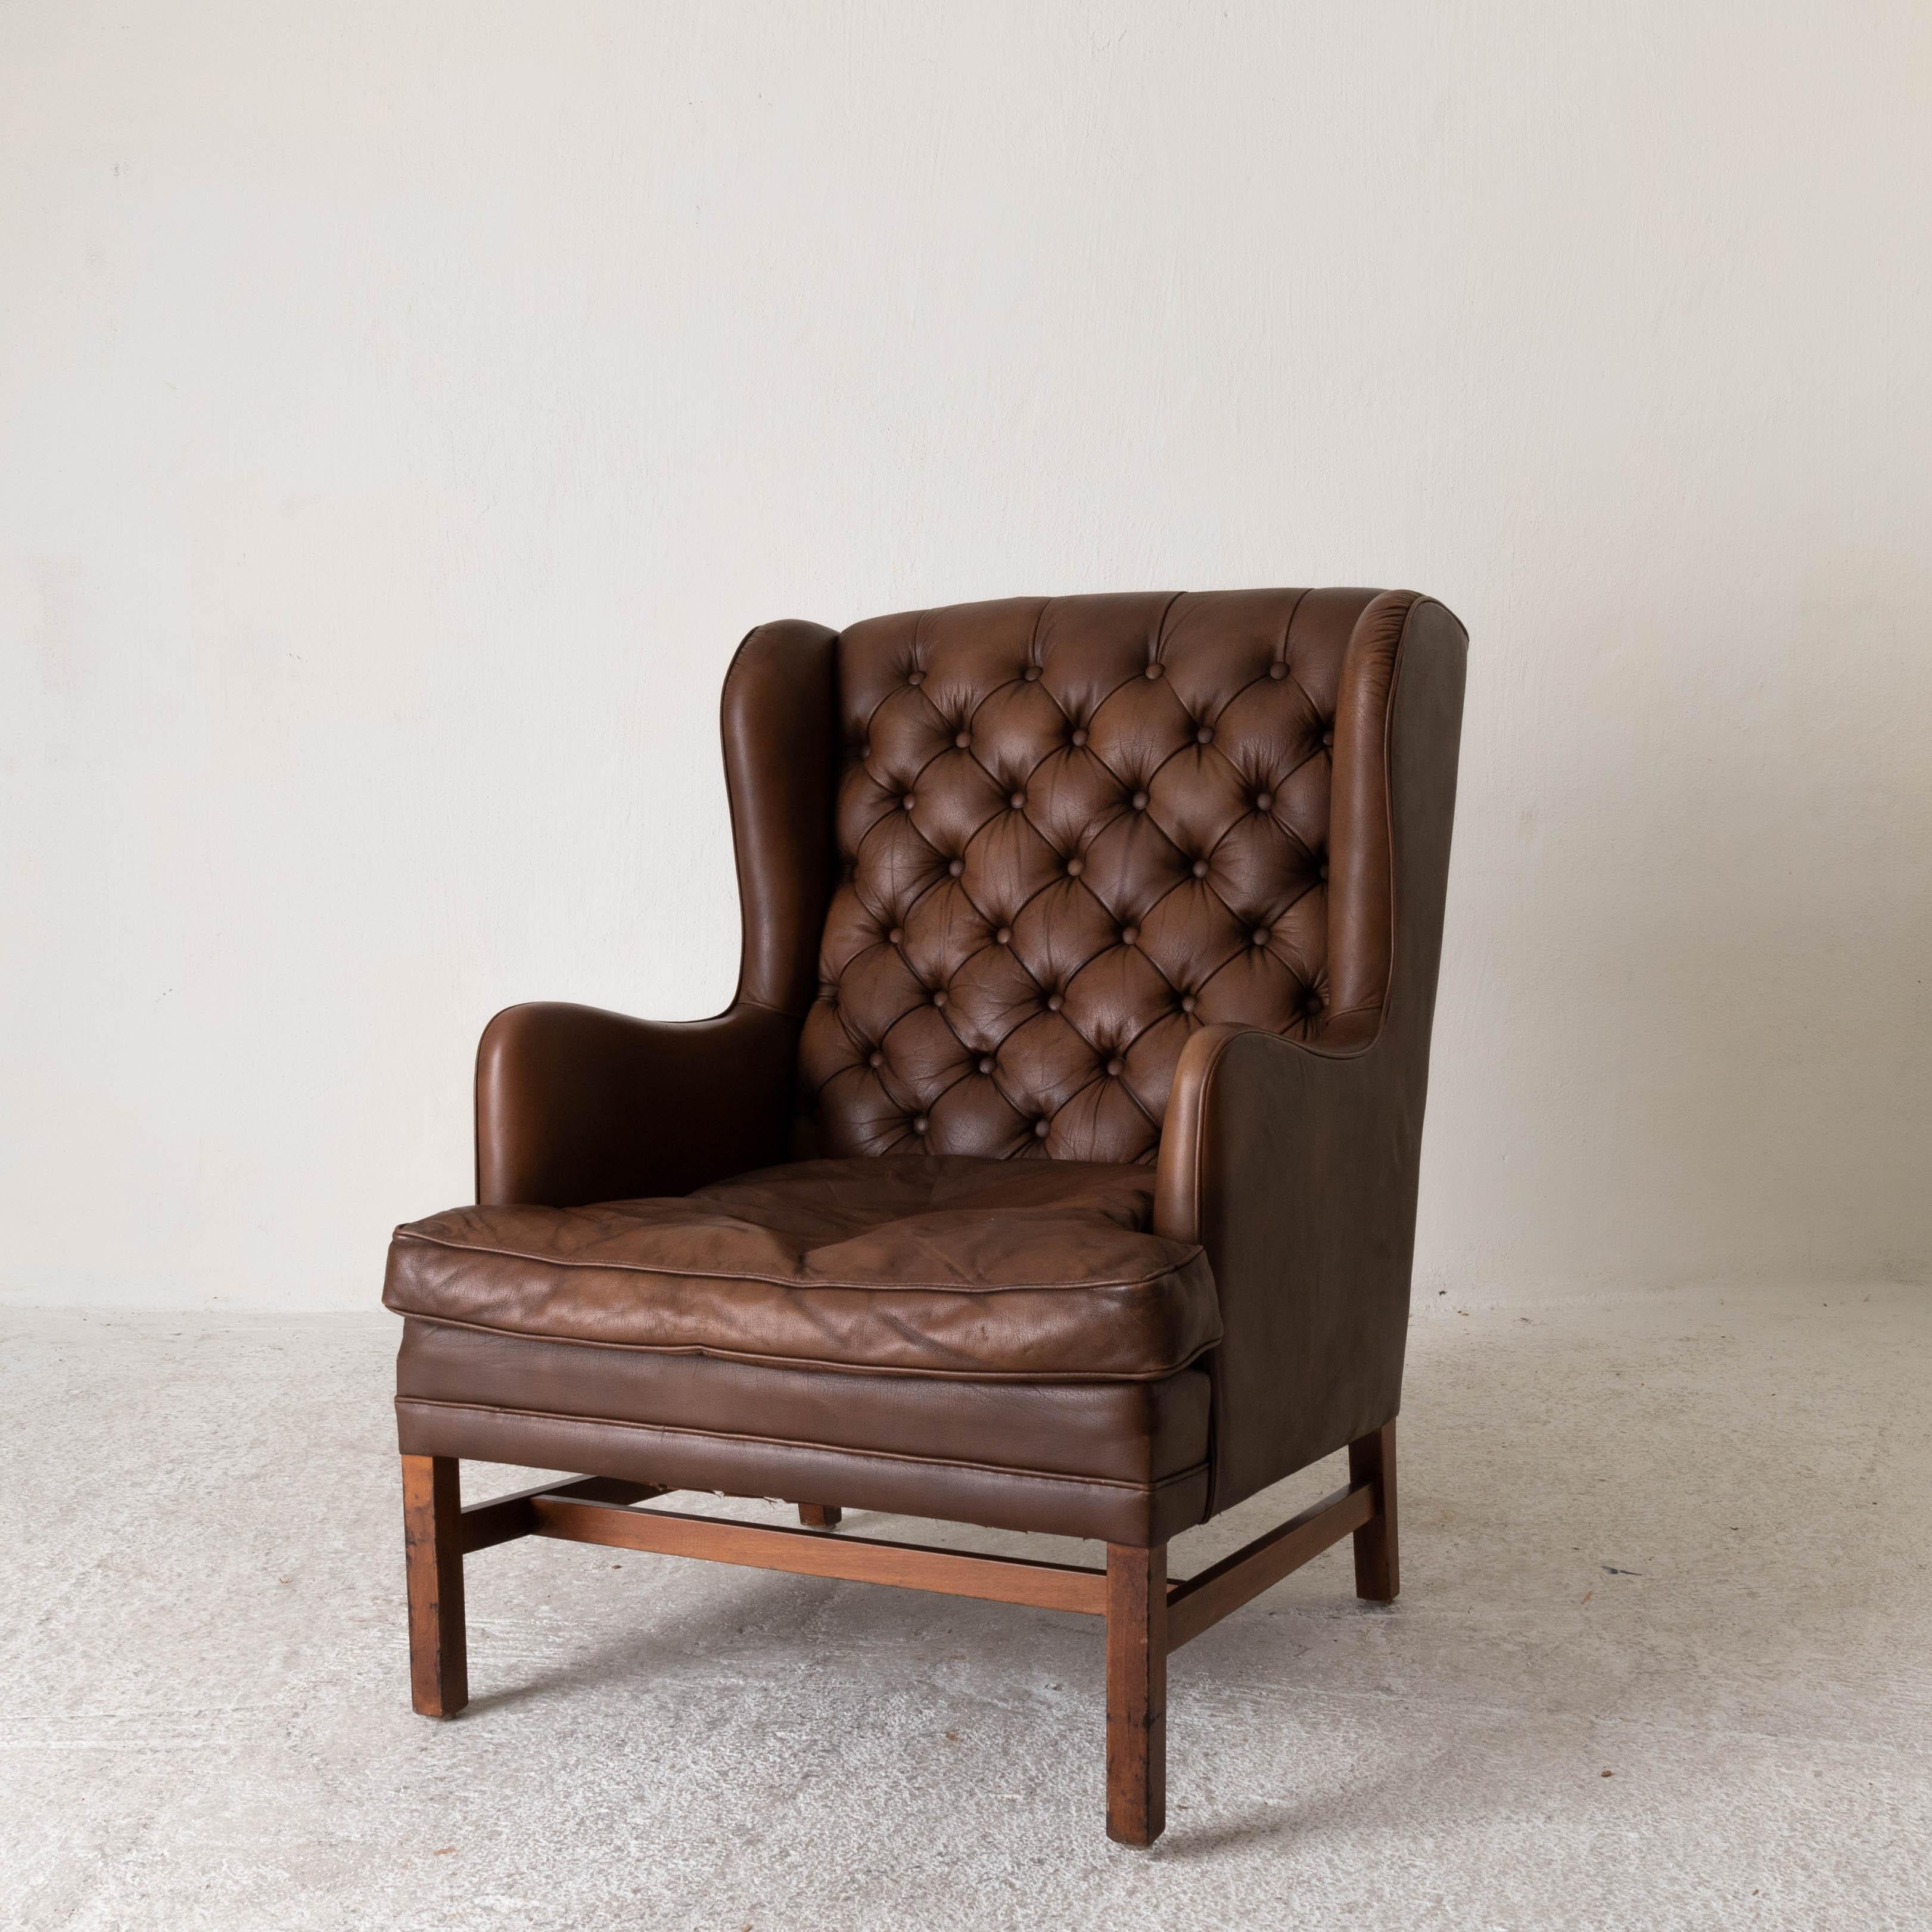 Chair wingback Swedish 20th century brown tufted, Sweden. A larger wingback chair made during the 20th century in Sweden. Upholstered in a brown leather with a tufted back. Square wooden legs.